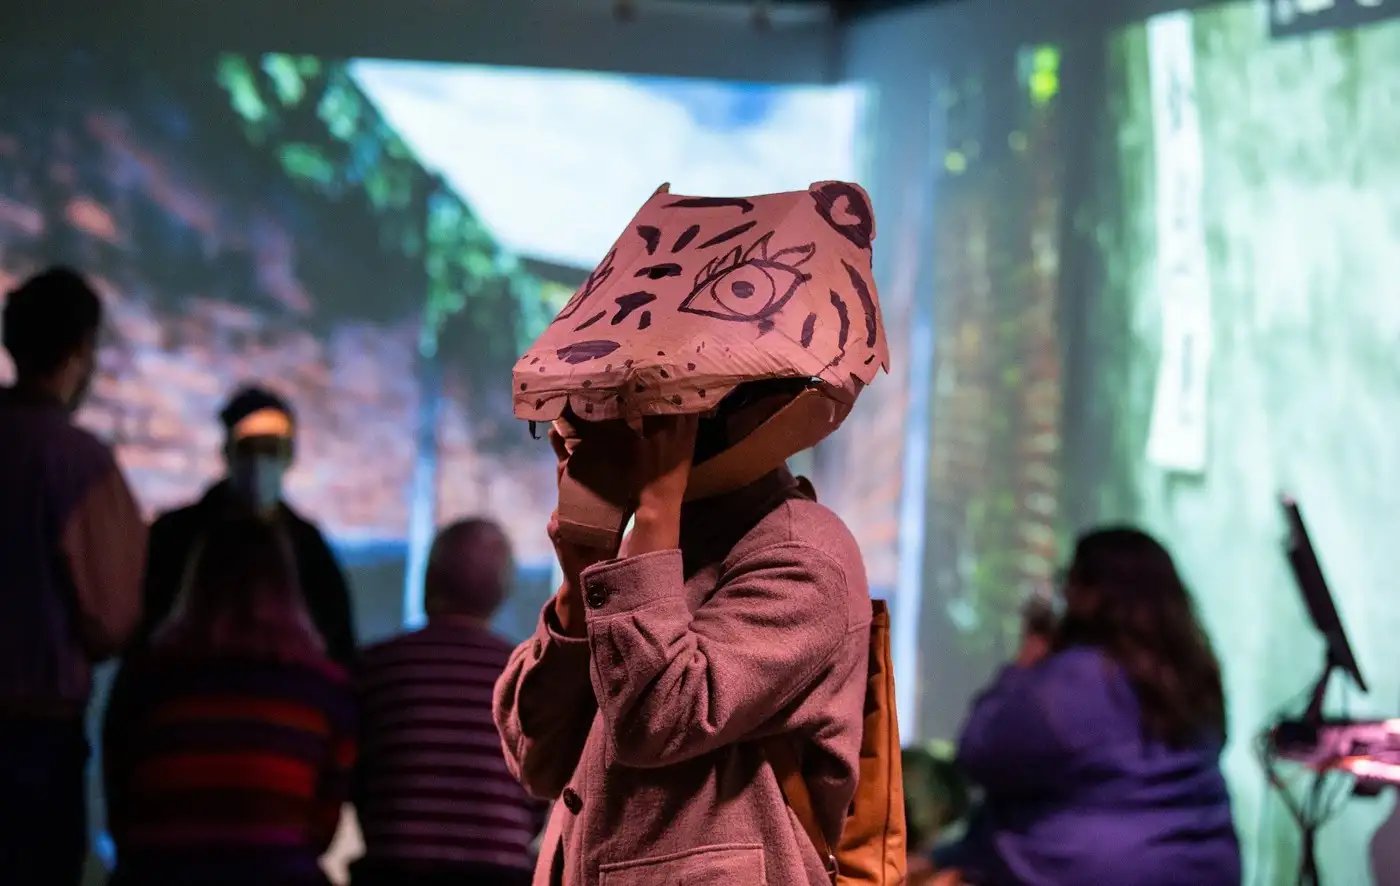 A visitor wears a cardboard tiger head mask, holding it steady by reaching into its mouth, while a group in the background sits looking at a projected 3D scene of brick walls and vegetation.